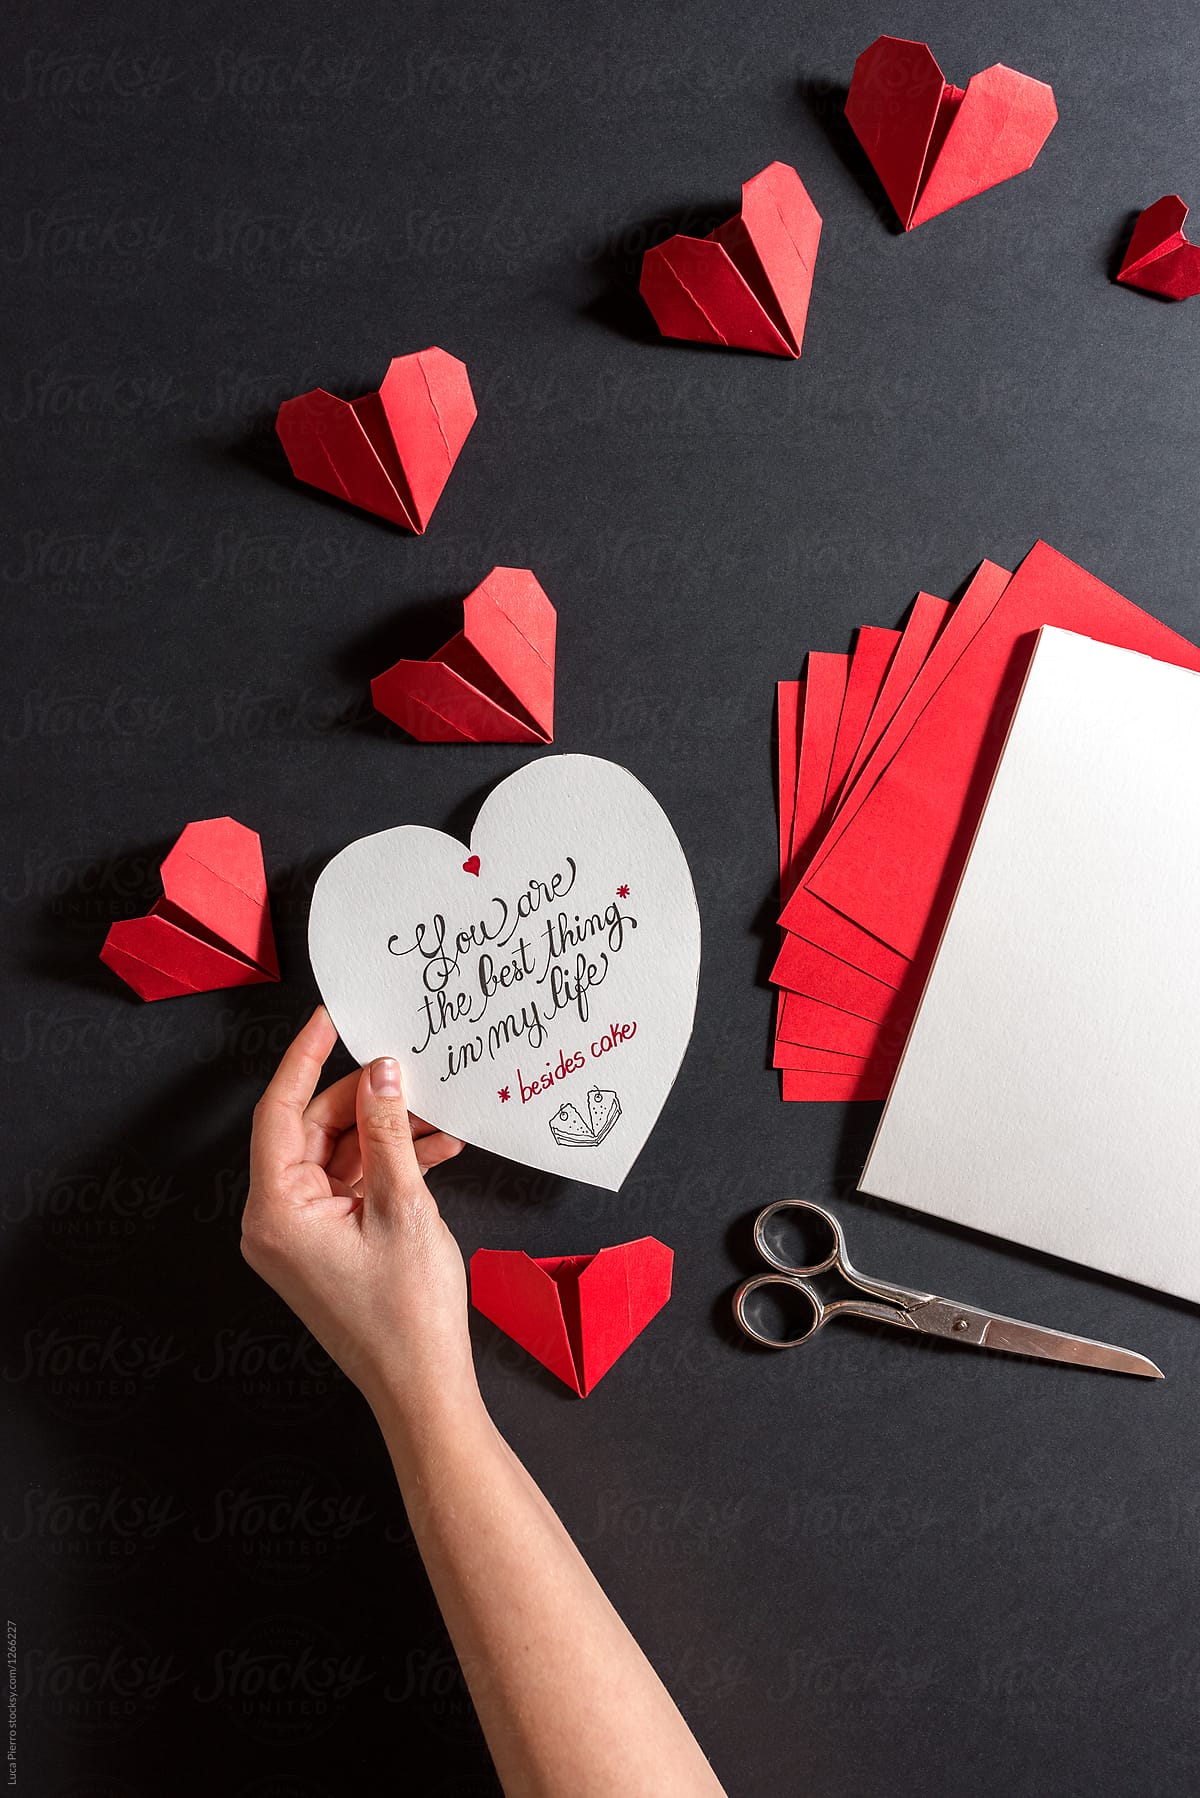 Handmade hearts and messages for Valentine\'s Day